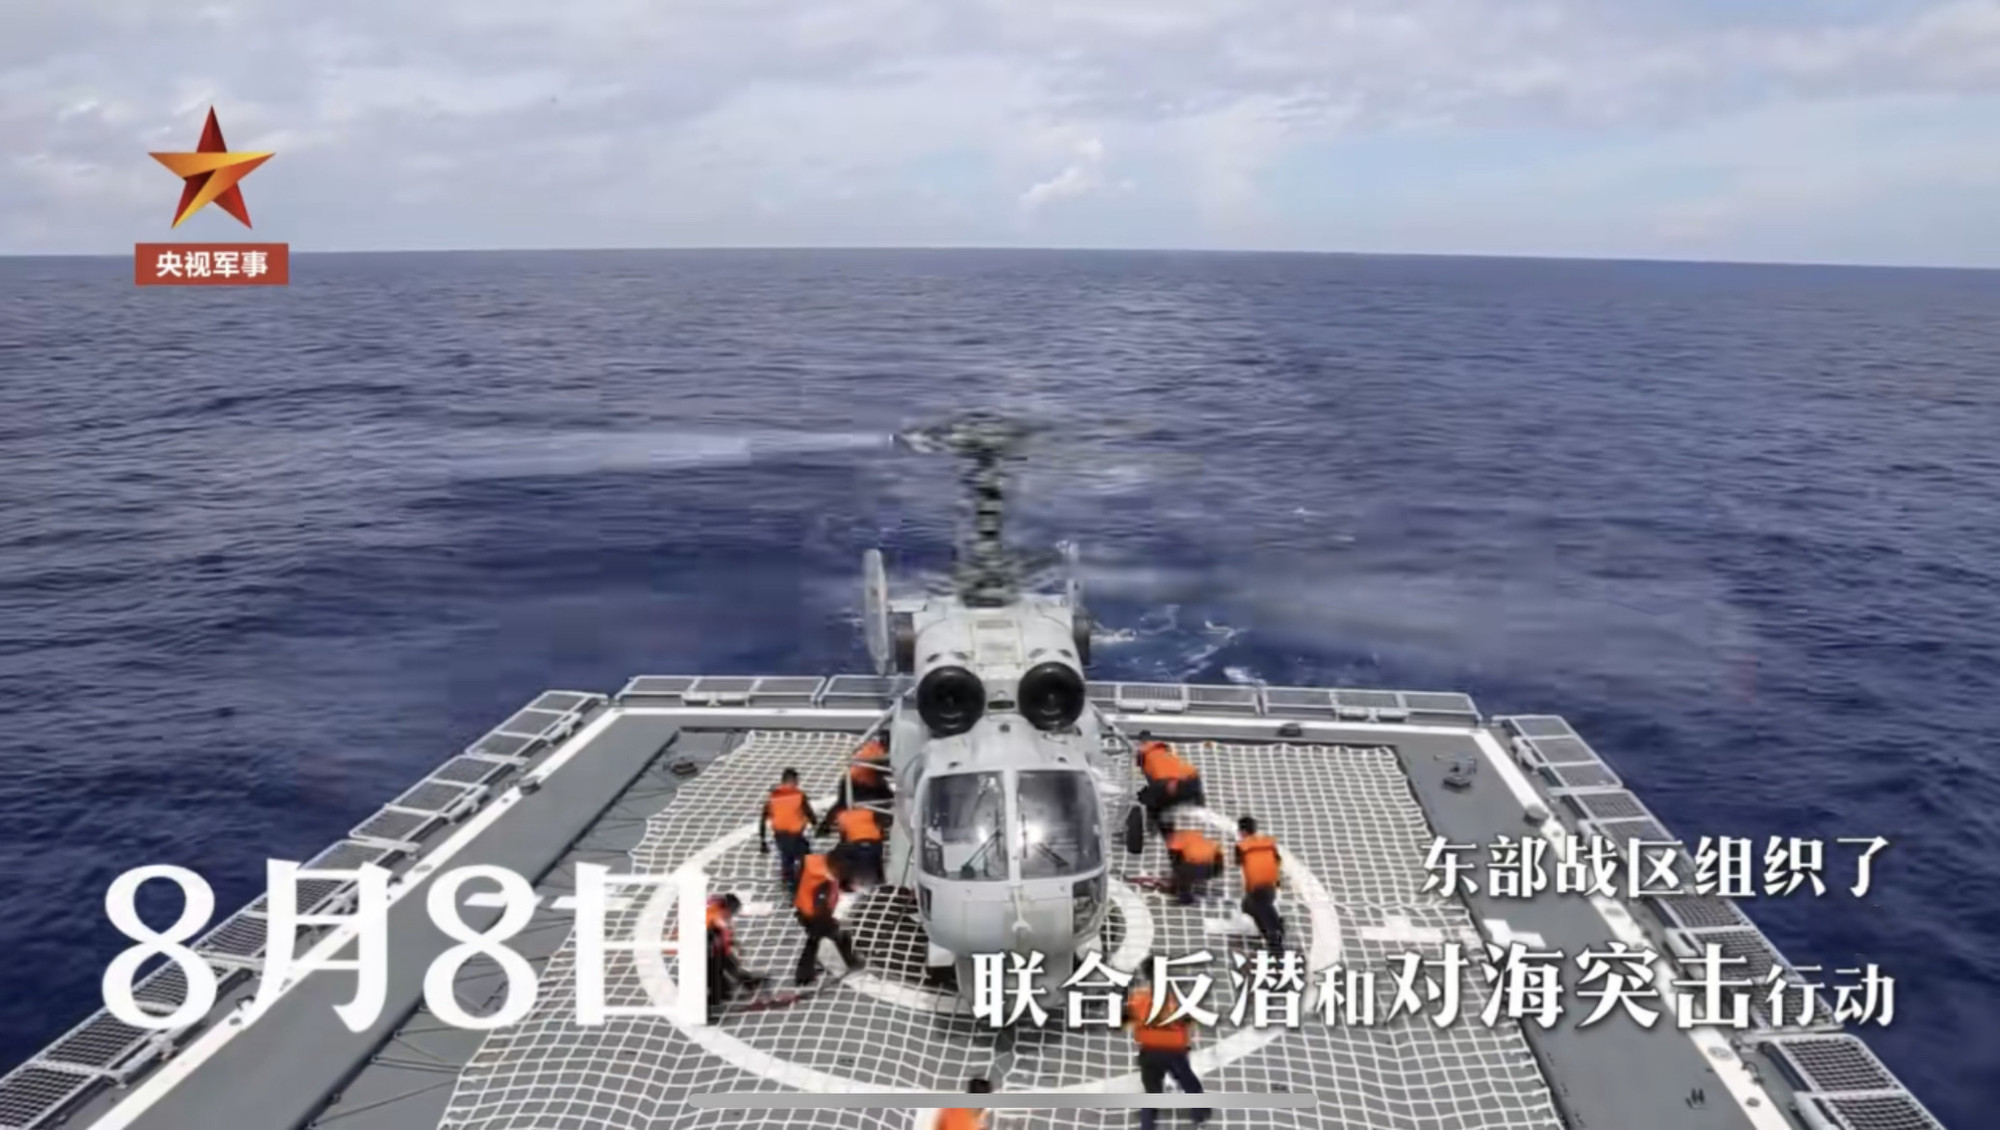 On Monday, several anti-submarine aircraft based in east Guangdong province in the neighbouring Southern Theatre Command were deployed to the PLA’s target waters. Photo: qq.com